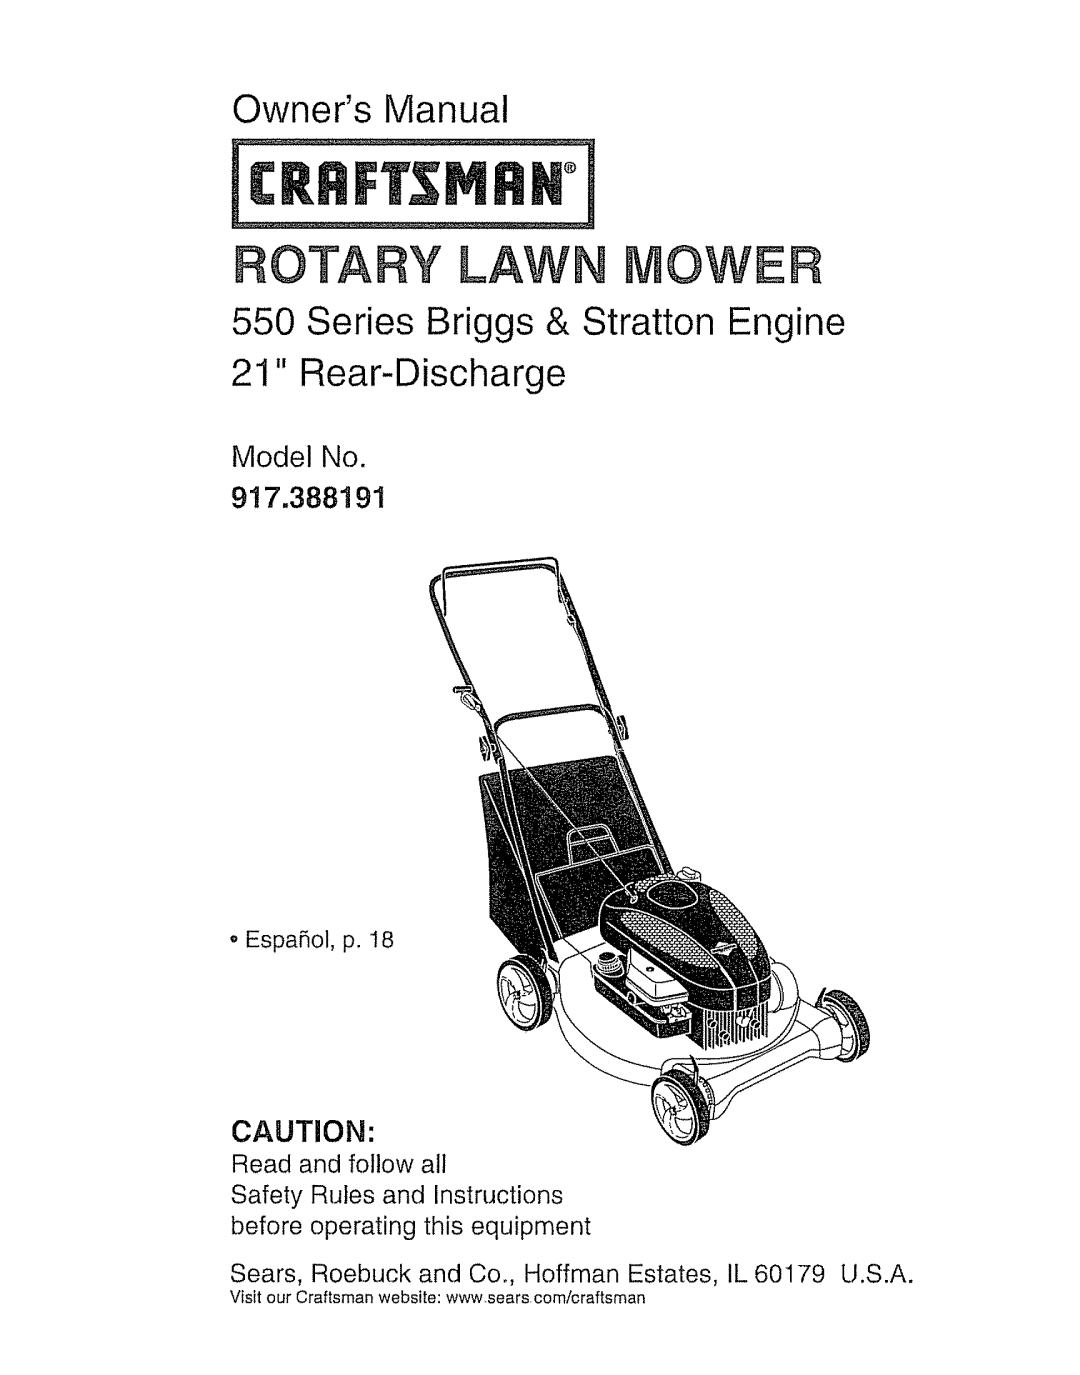 Craftsman manual Series Briggs & Stratton Engine, Model No 917.388191, Otary Law Ower, Owners Manual, Rear-Discharge 